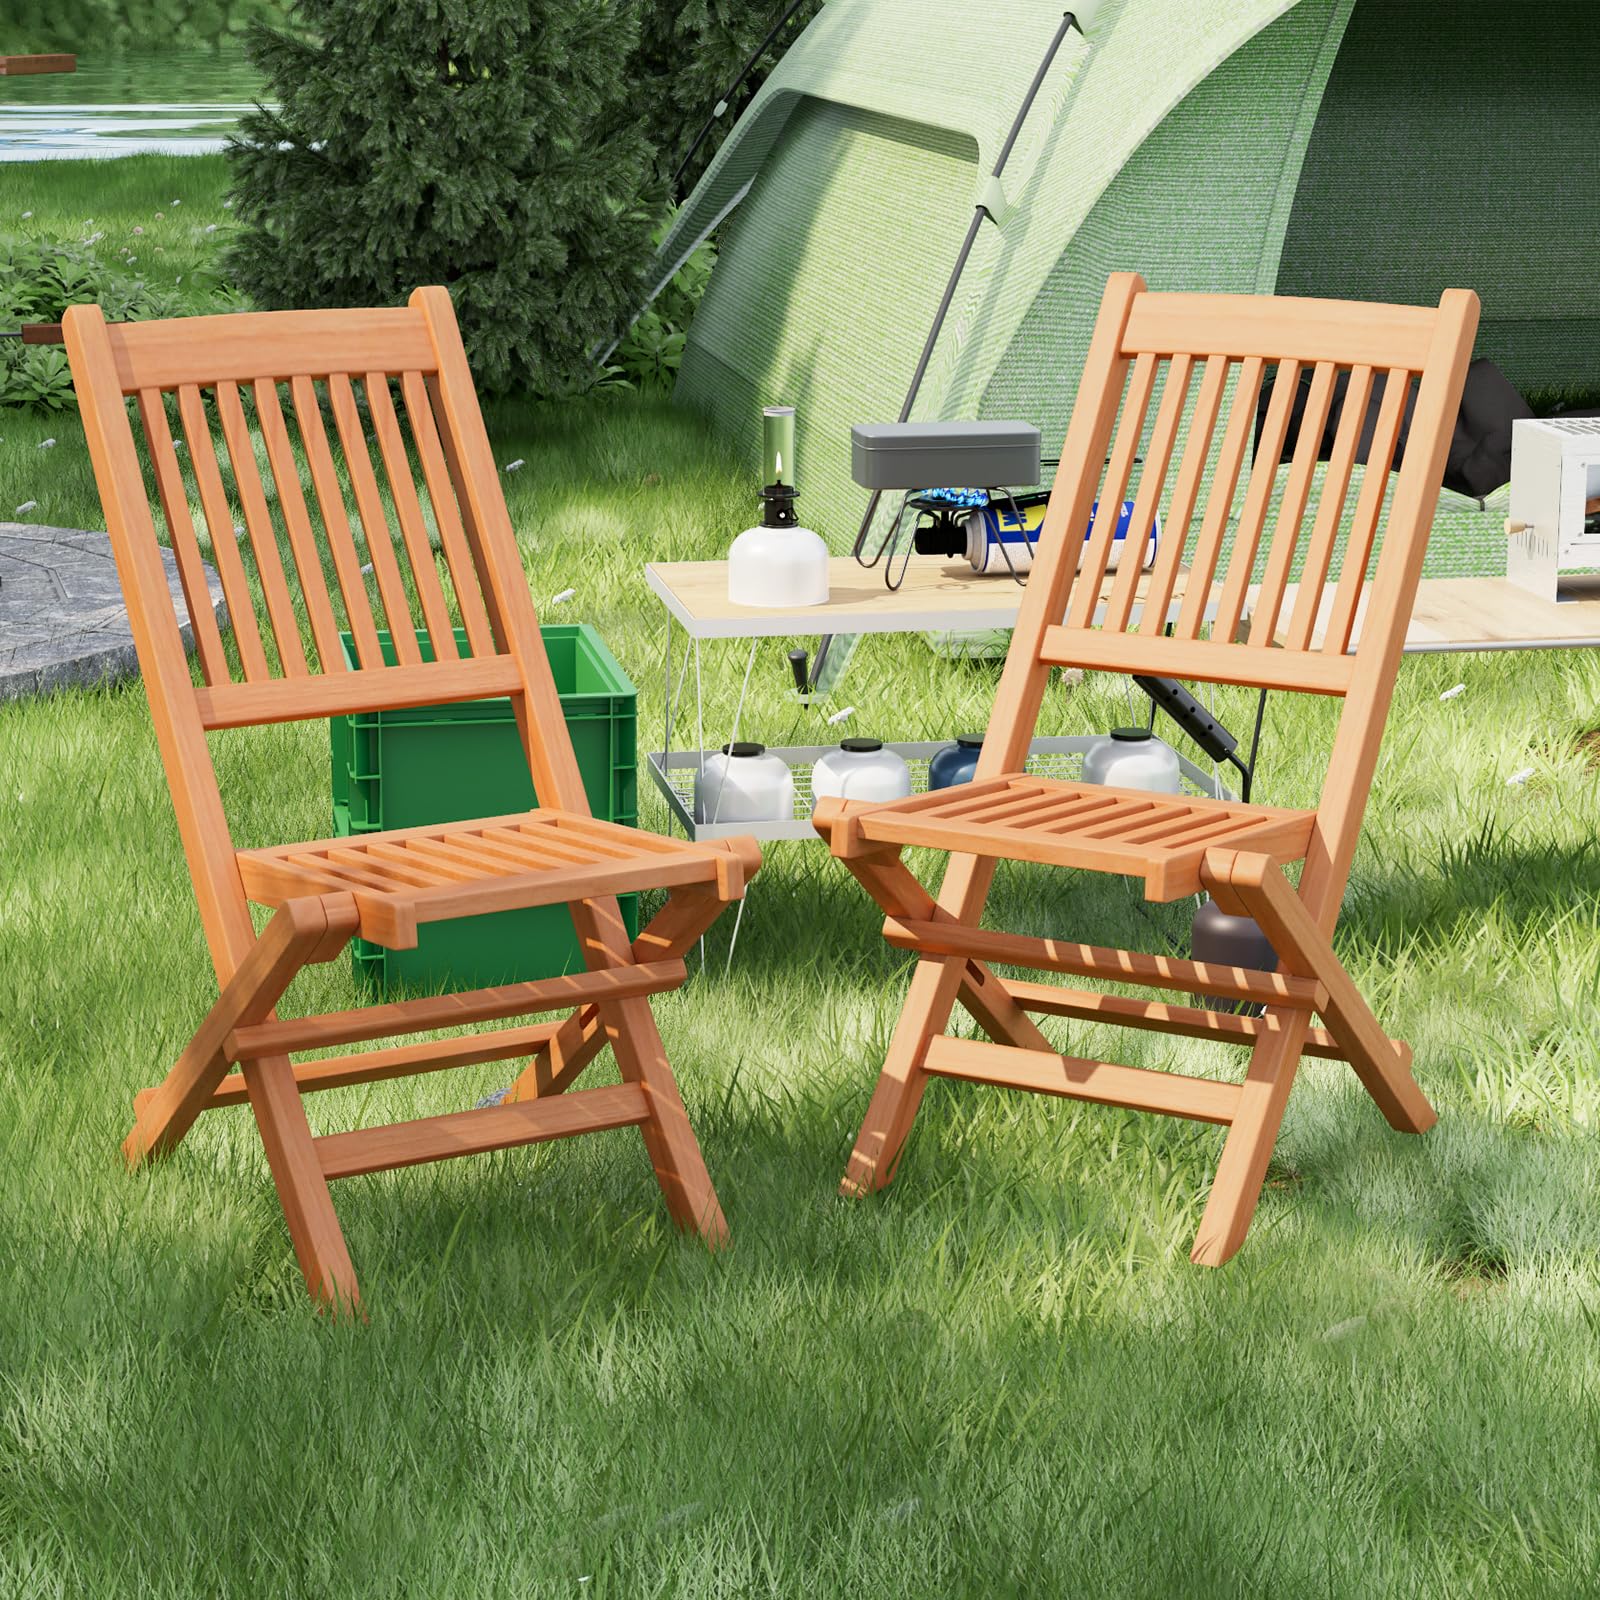 Giantex Patio Folding Chairs, Solid Teak Wood Outdoor Chairs with Slatted Seat & Back